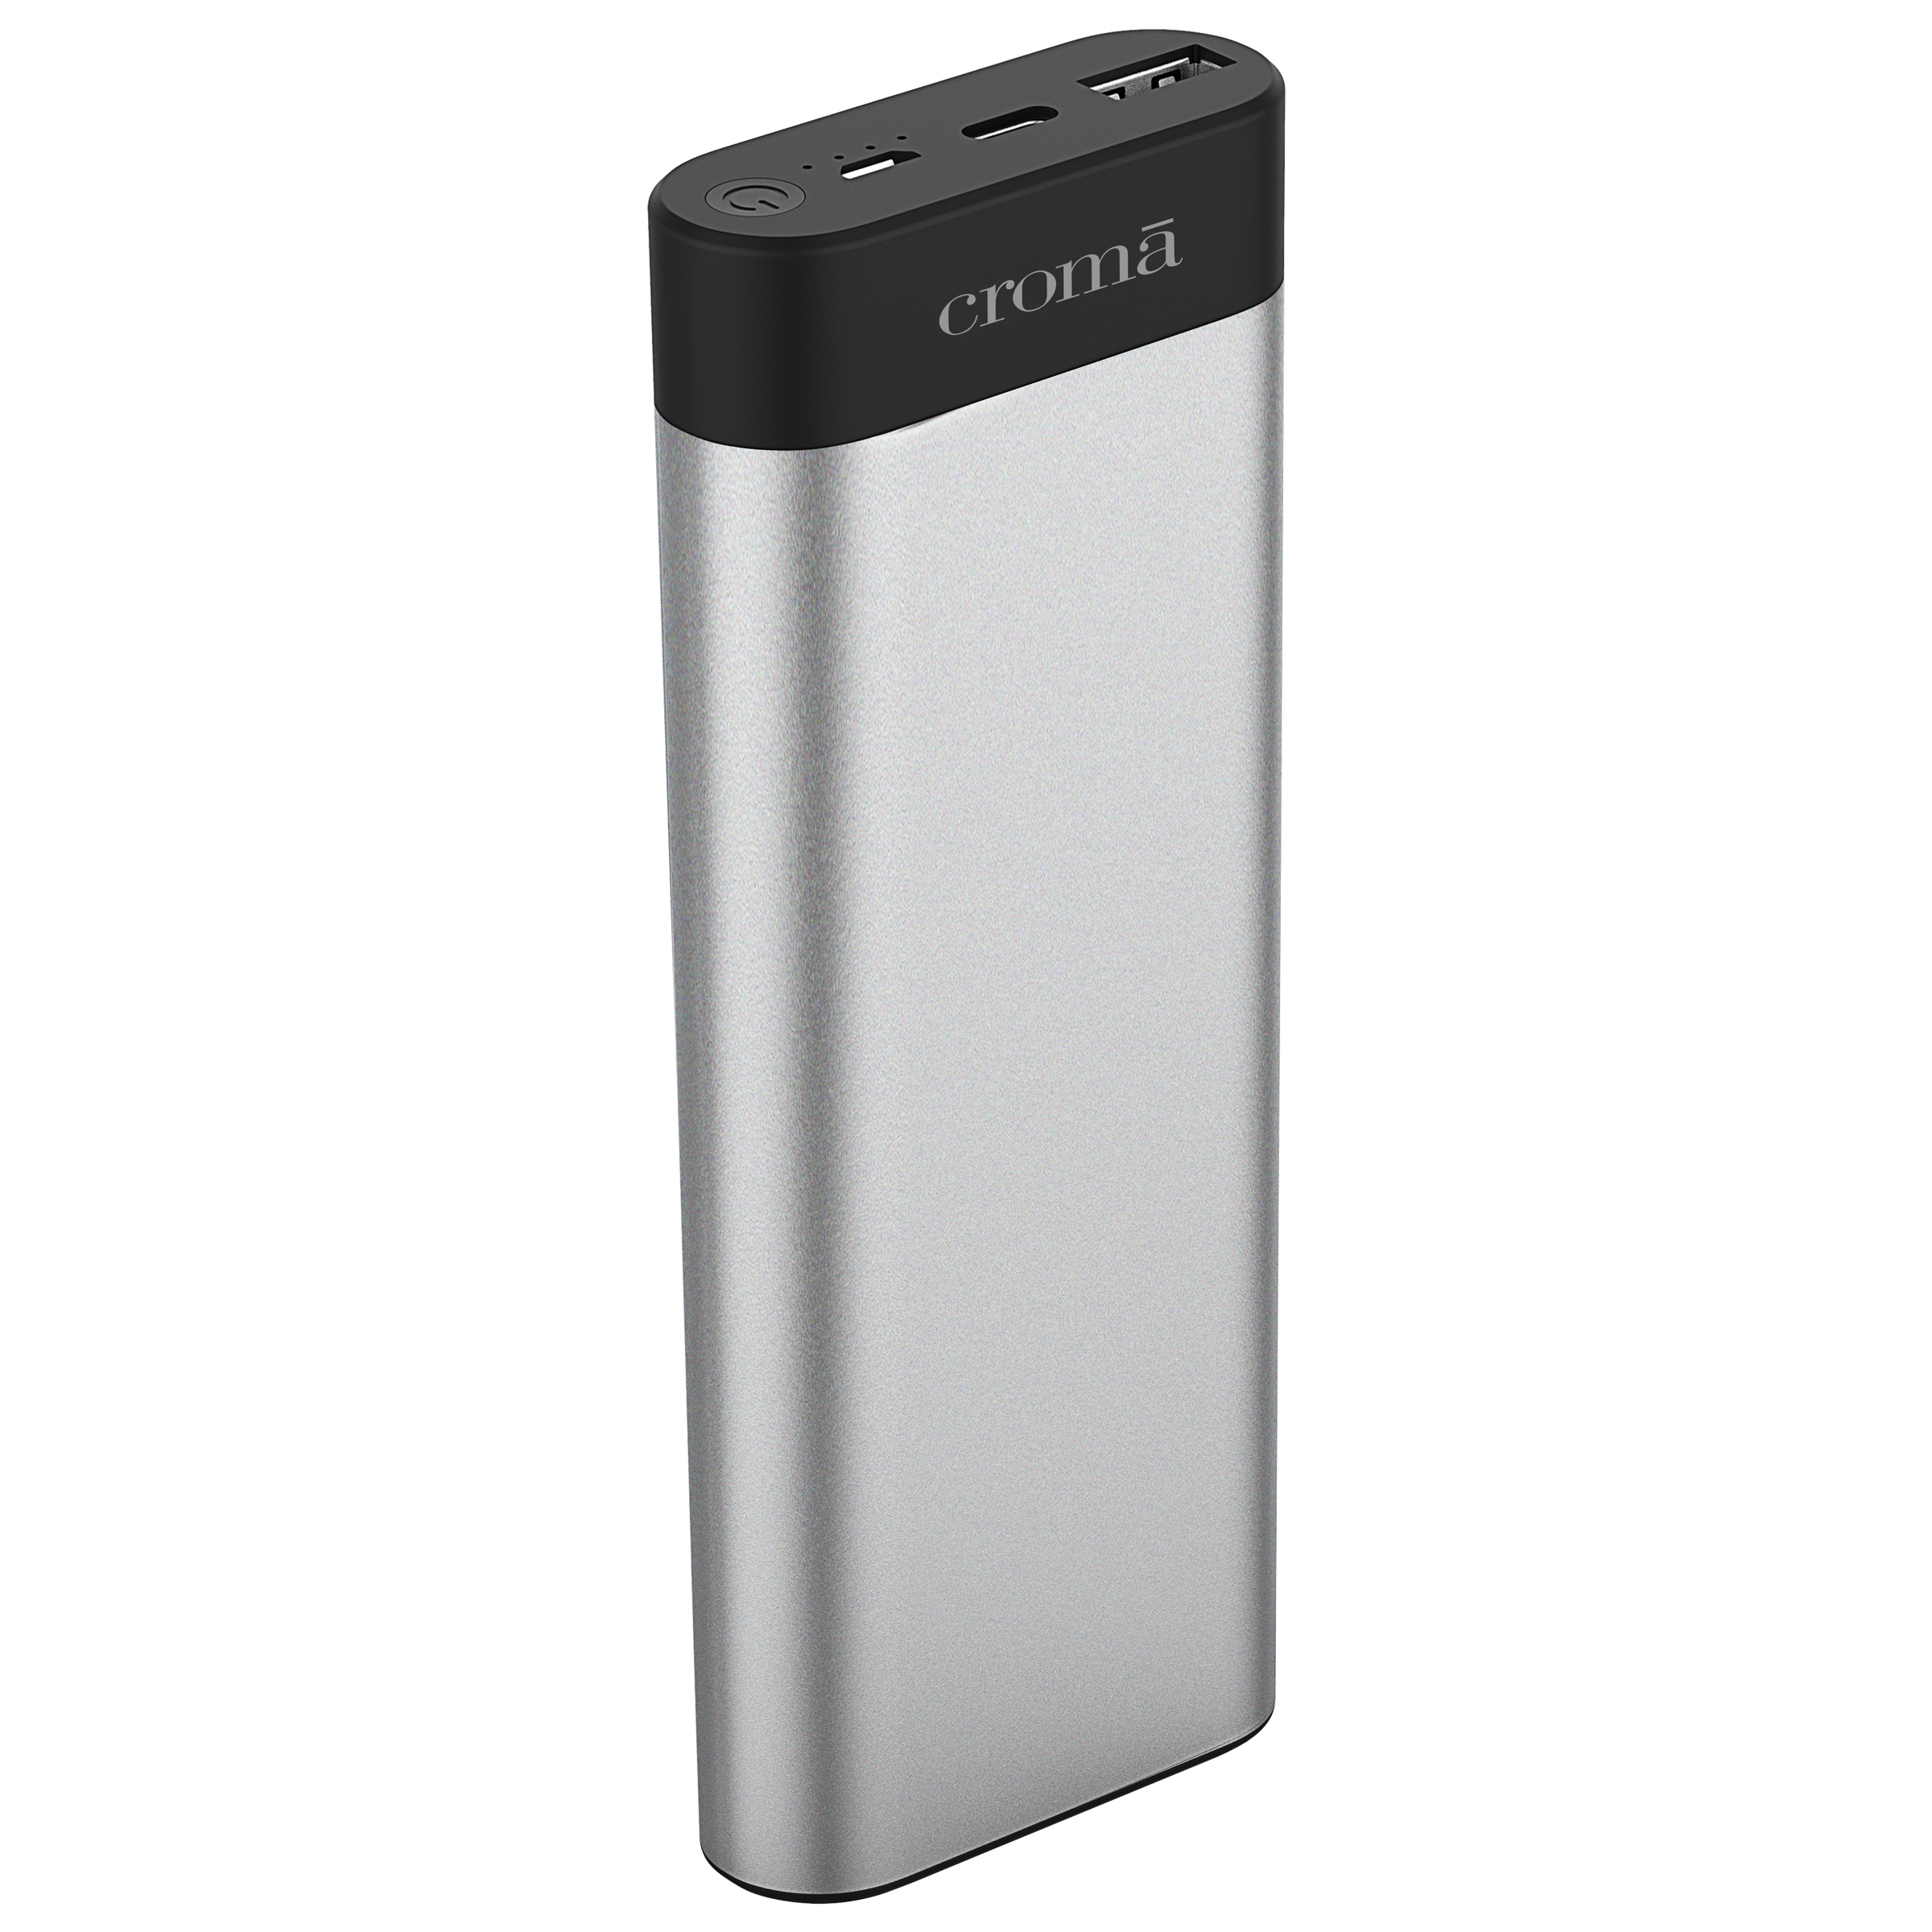 Croma 15600 mAh 45W Fast Charging Power Bank (1 Type C, 1 Micro USB & 1 Type A Ports, Aluminium Casing, Over Charge Protection, Silver)